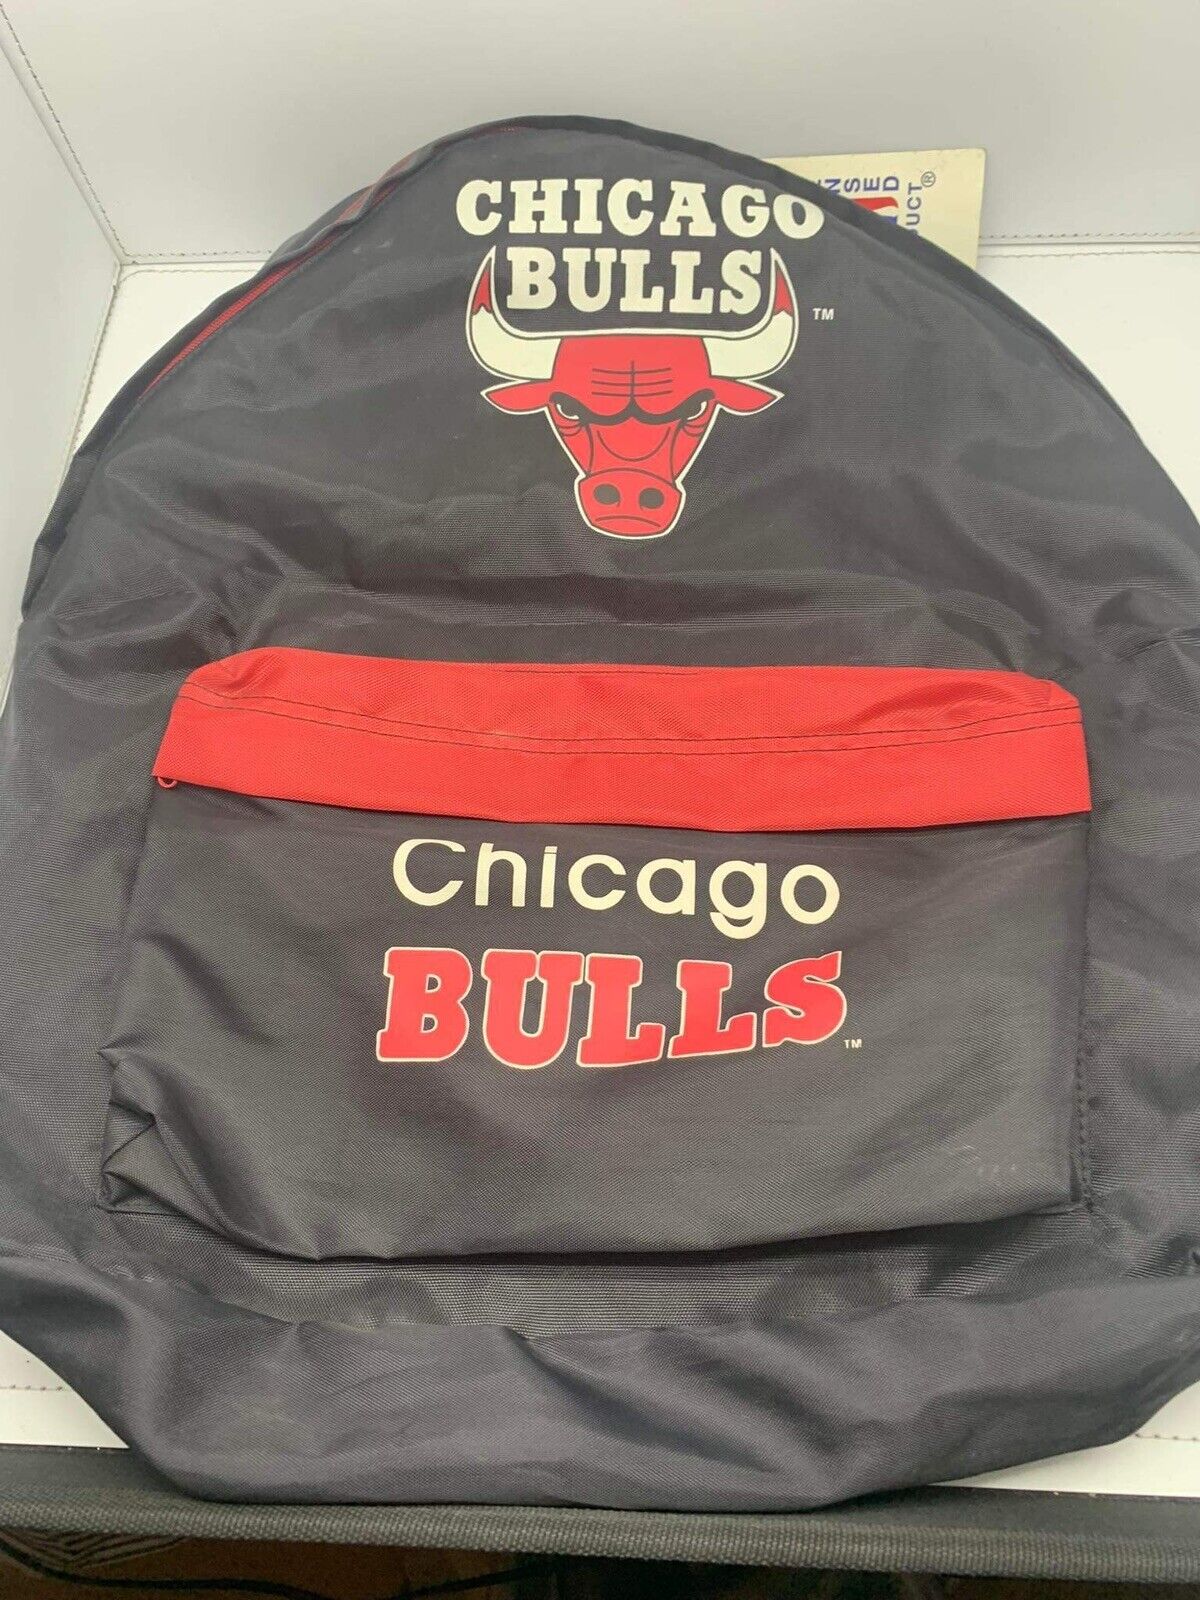 Vintage Chicago Bulls Backpack Replica Master Copy Nasco NEW WITH TAGS | eBay